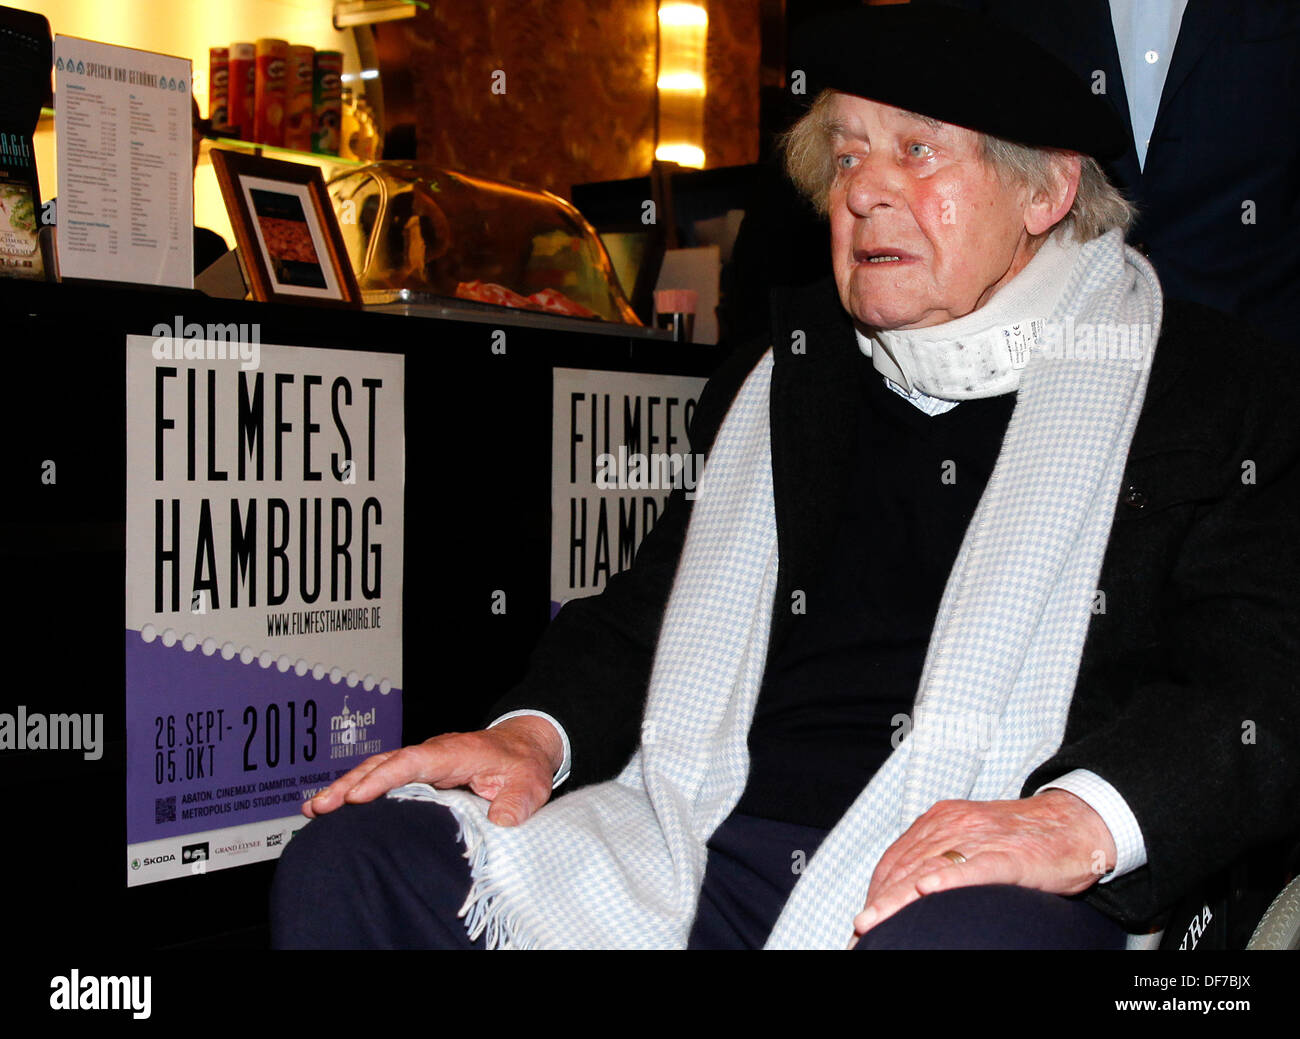 Hamburg, Germany. 28th Sep, 2013. Author Siegfried Lenz waits for the premiere of the movie 'Die Flut ist puenktlich' (lit: the flood is punctual) at the Passage-Kino in Hamburg, Germany, 28 September 2013. The film is based on the short story with the same name written by Siegfried Lenz. Photo: AXEL HEIMKEN/dpa/Alamy Live News Stock Photo